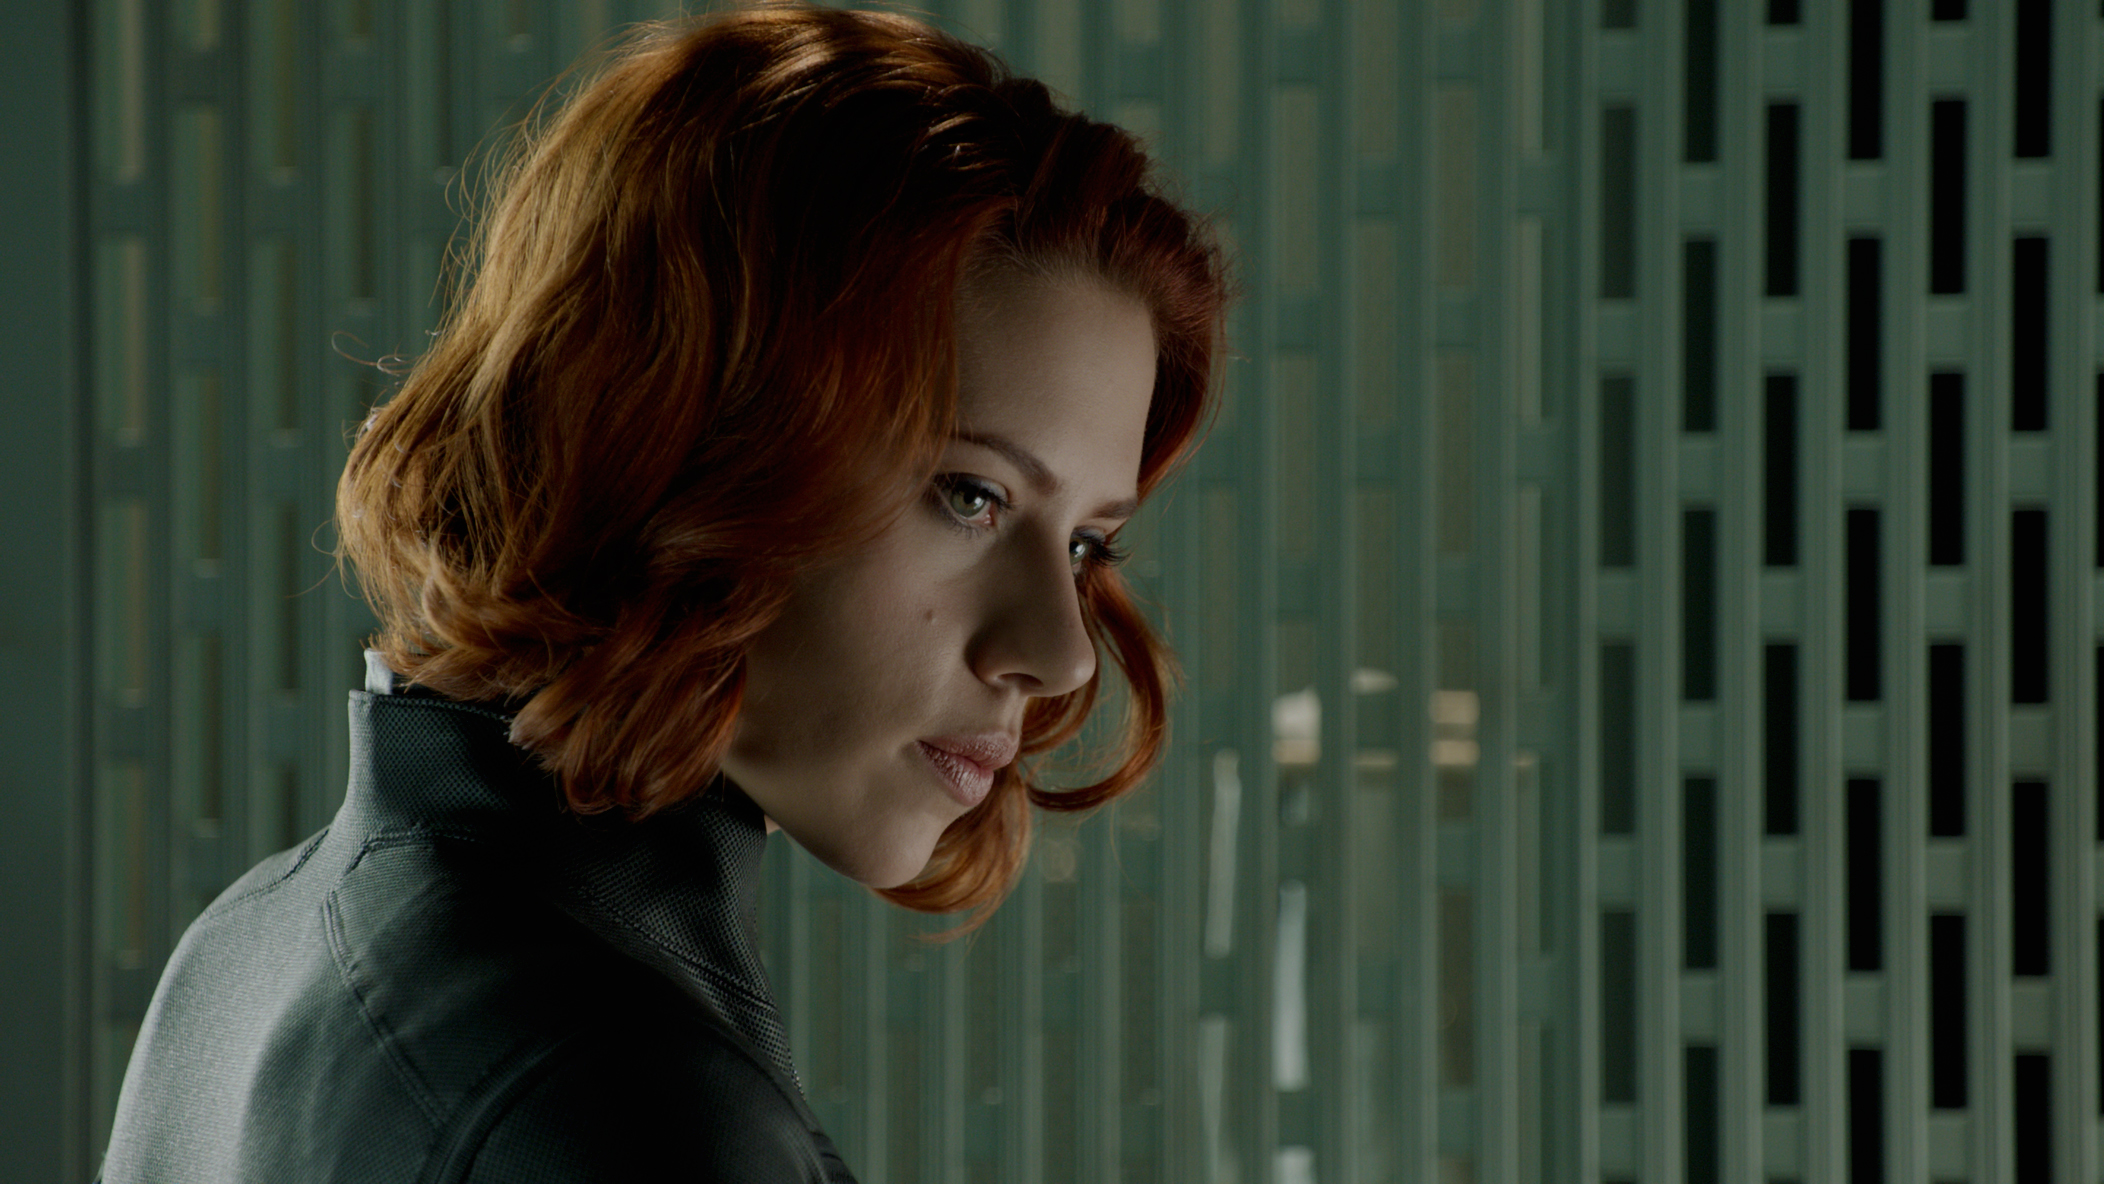 Scarlett Johansson As Black Widow In The Avengers See All Of The Pictures From The Avengers 